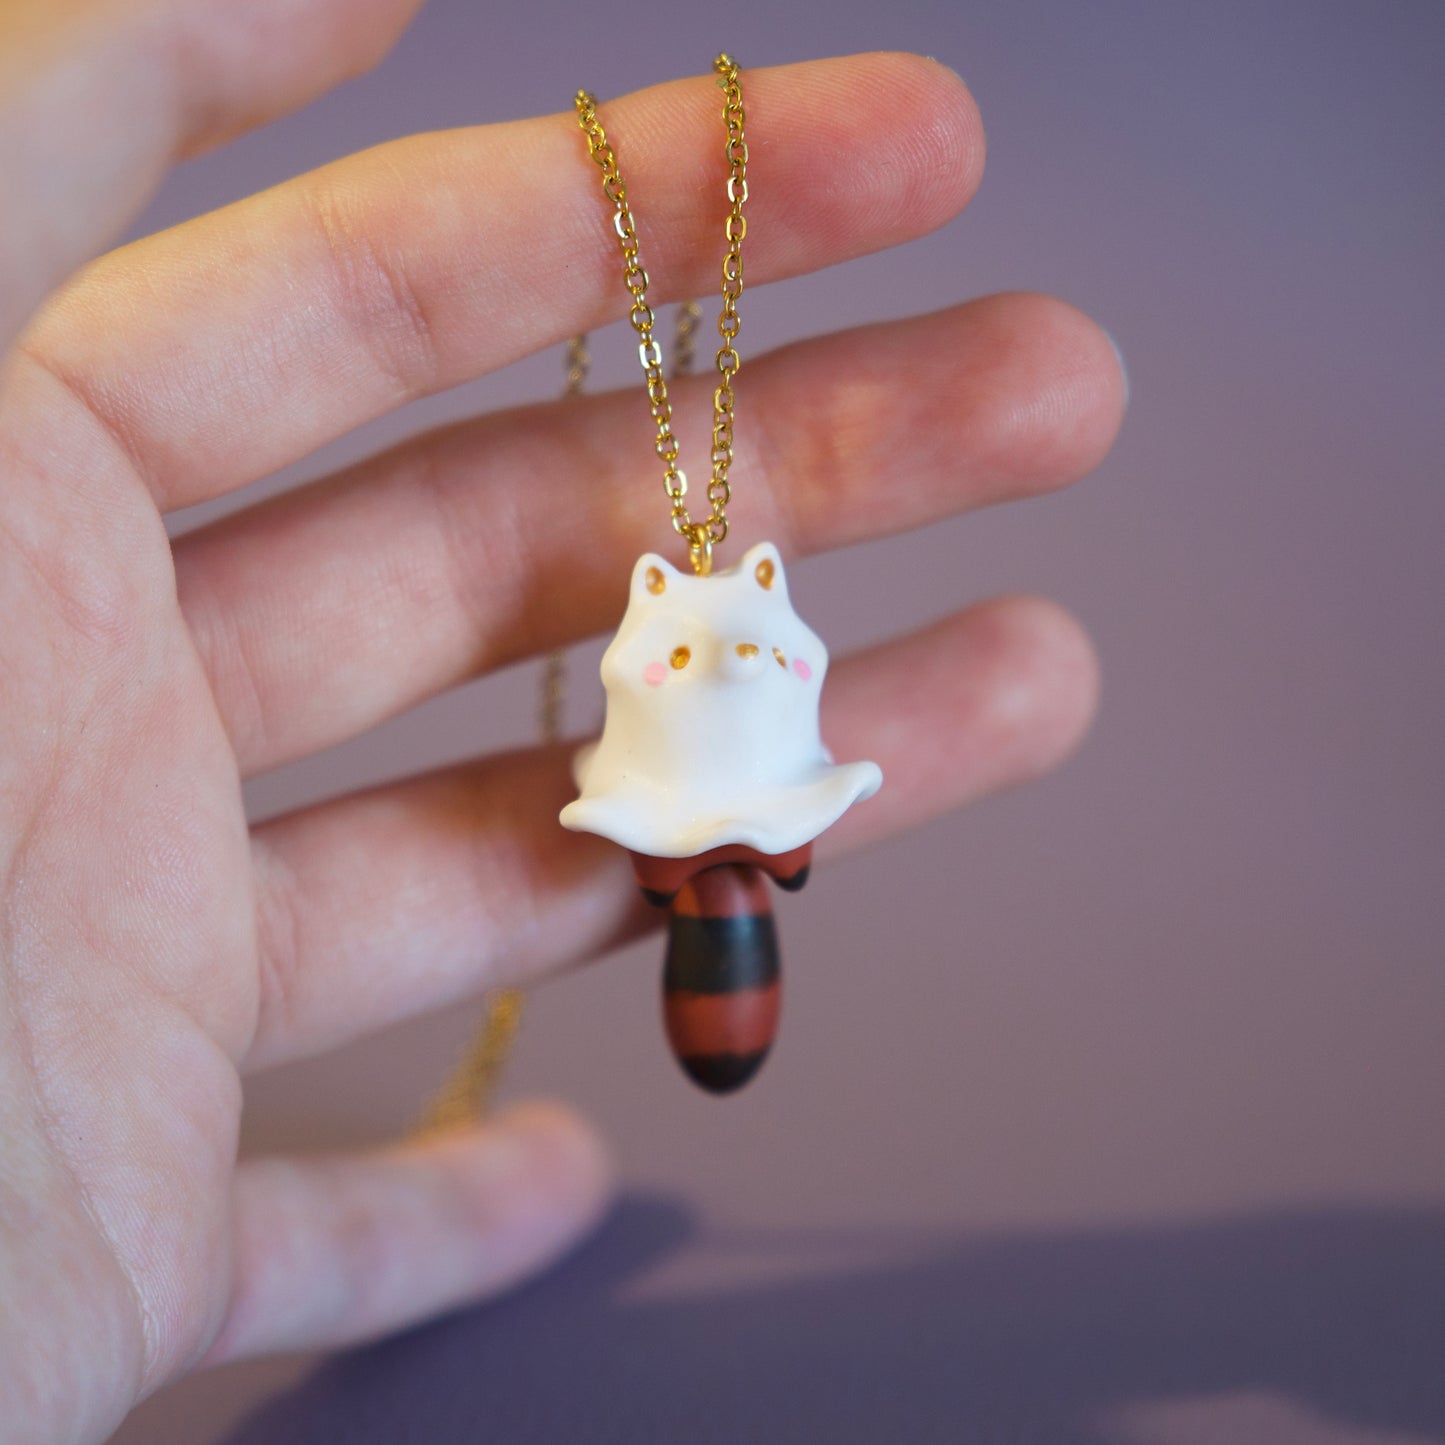 Red Panda Ghost Necklace in Polymer Clay